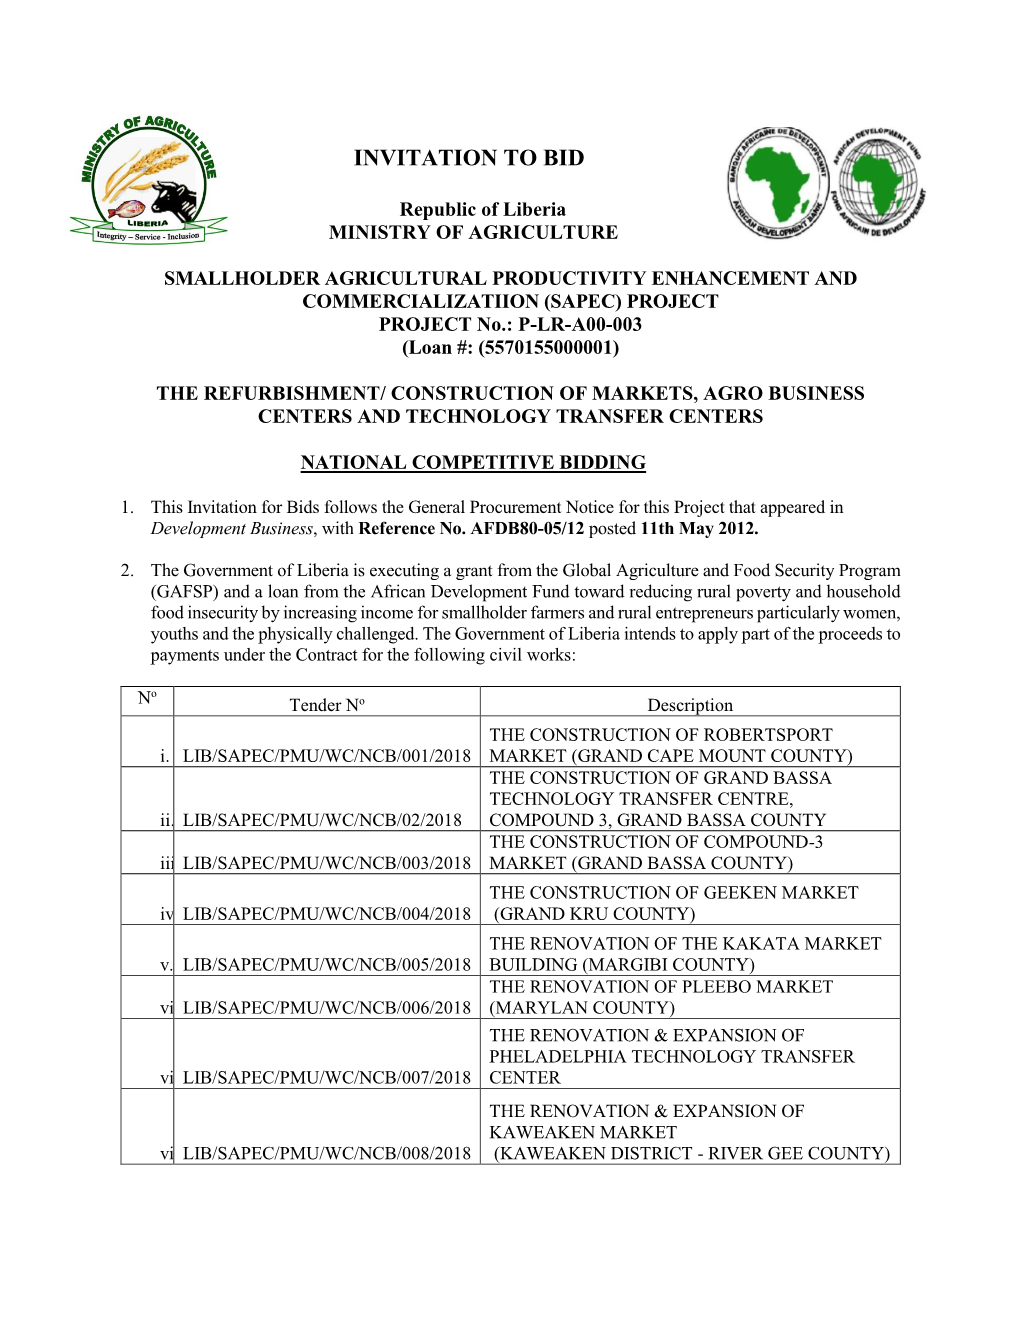 NCB:THE REFURBISHMENT/ CONSTRUCTION of MARKETS, AGRO BUSINESS CENTERS and TECHNOLOGY TRANSFER CENTERS: Deadline